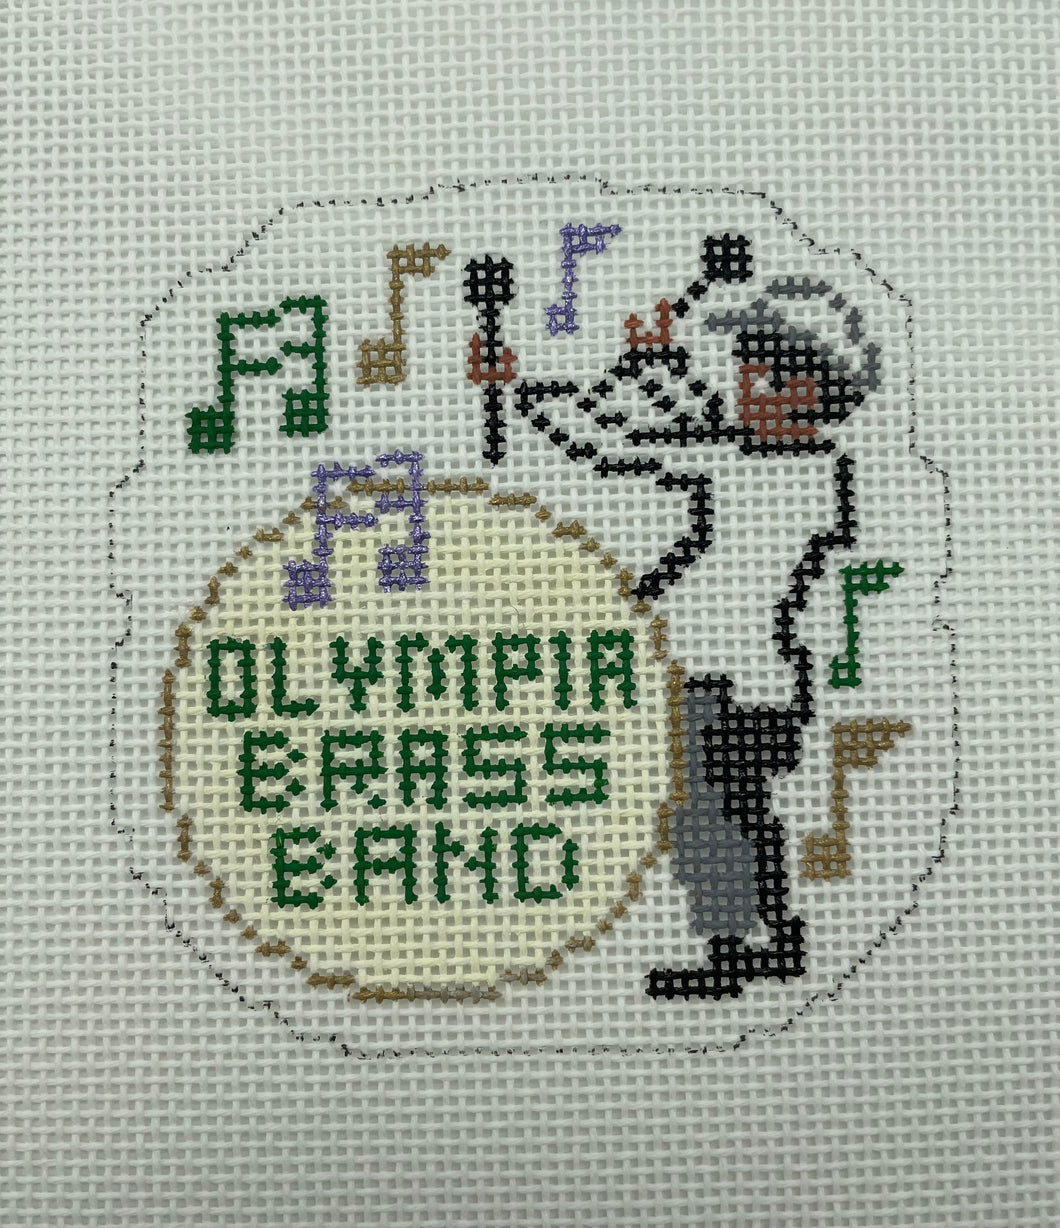 Olympia Brass Band Needlepoint Ornament